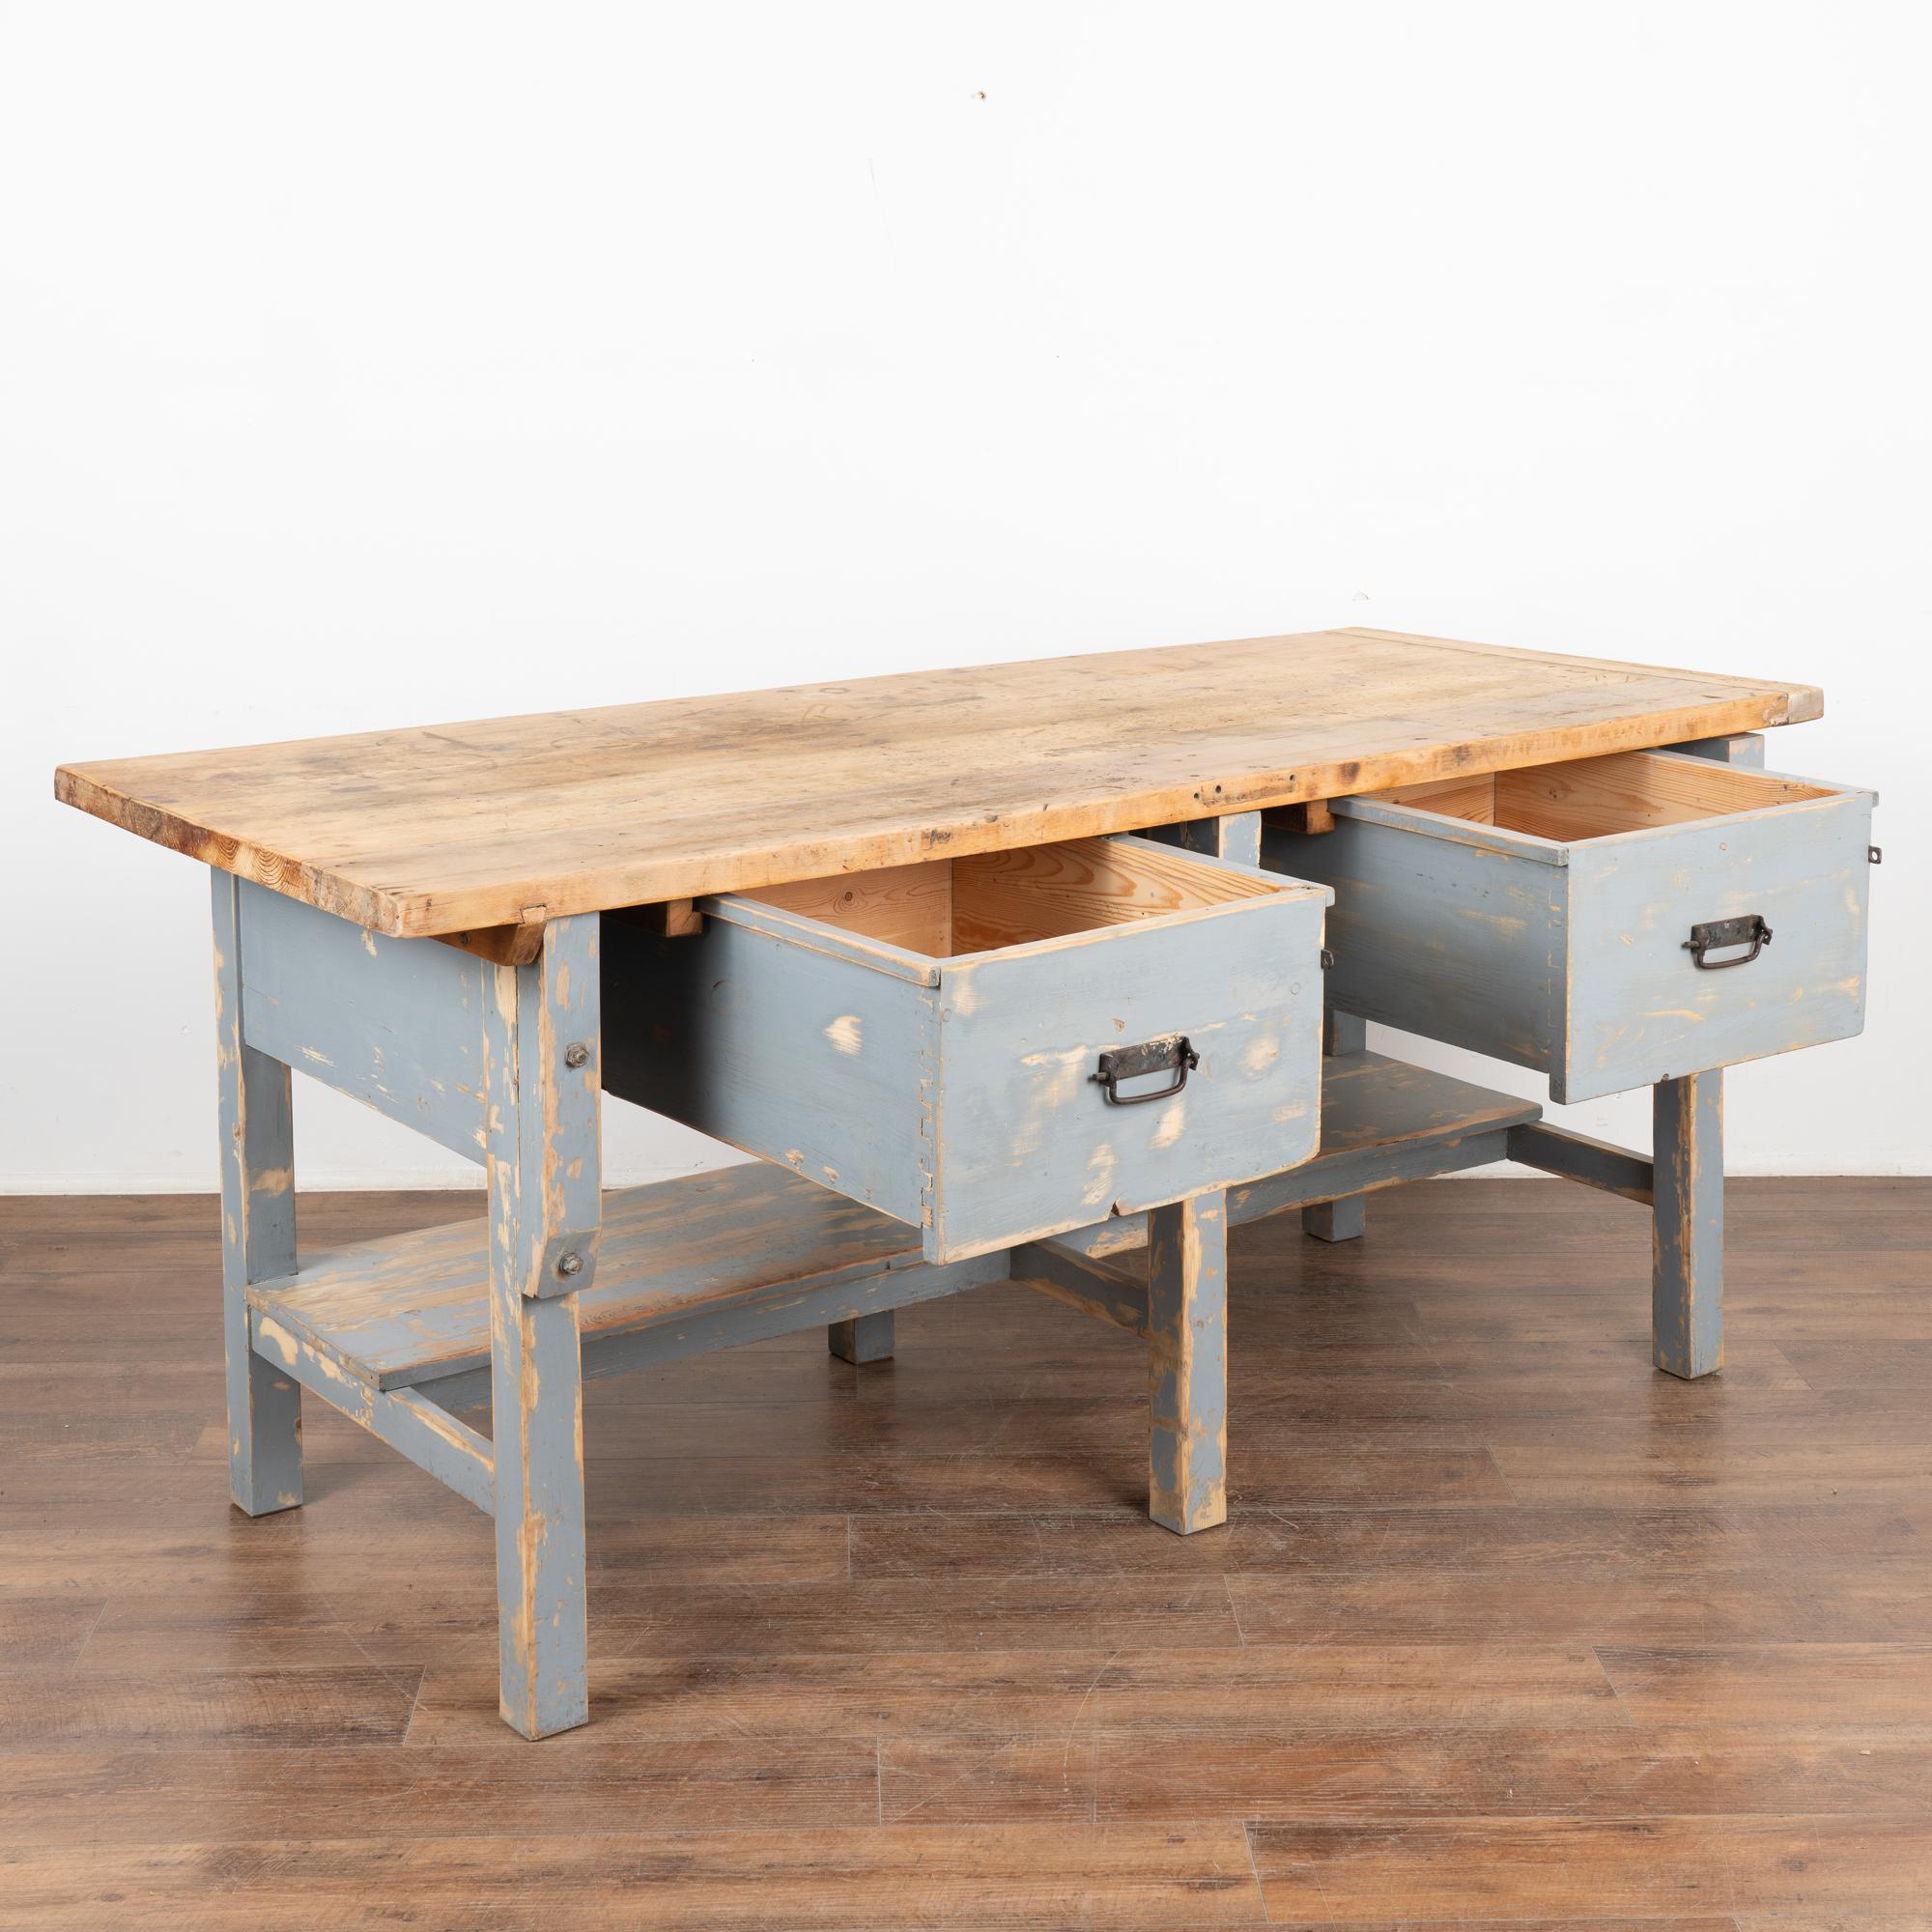 Hungarian Large Blue Rustic Work Table Kitchen Island With 2 Drawers and Shelf, Circa 1890 For Sale